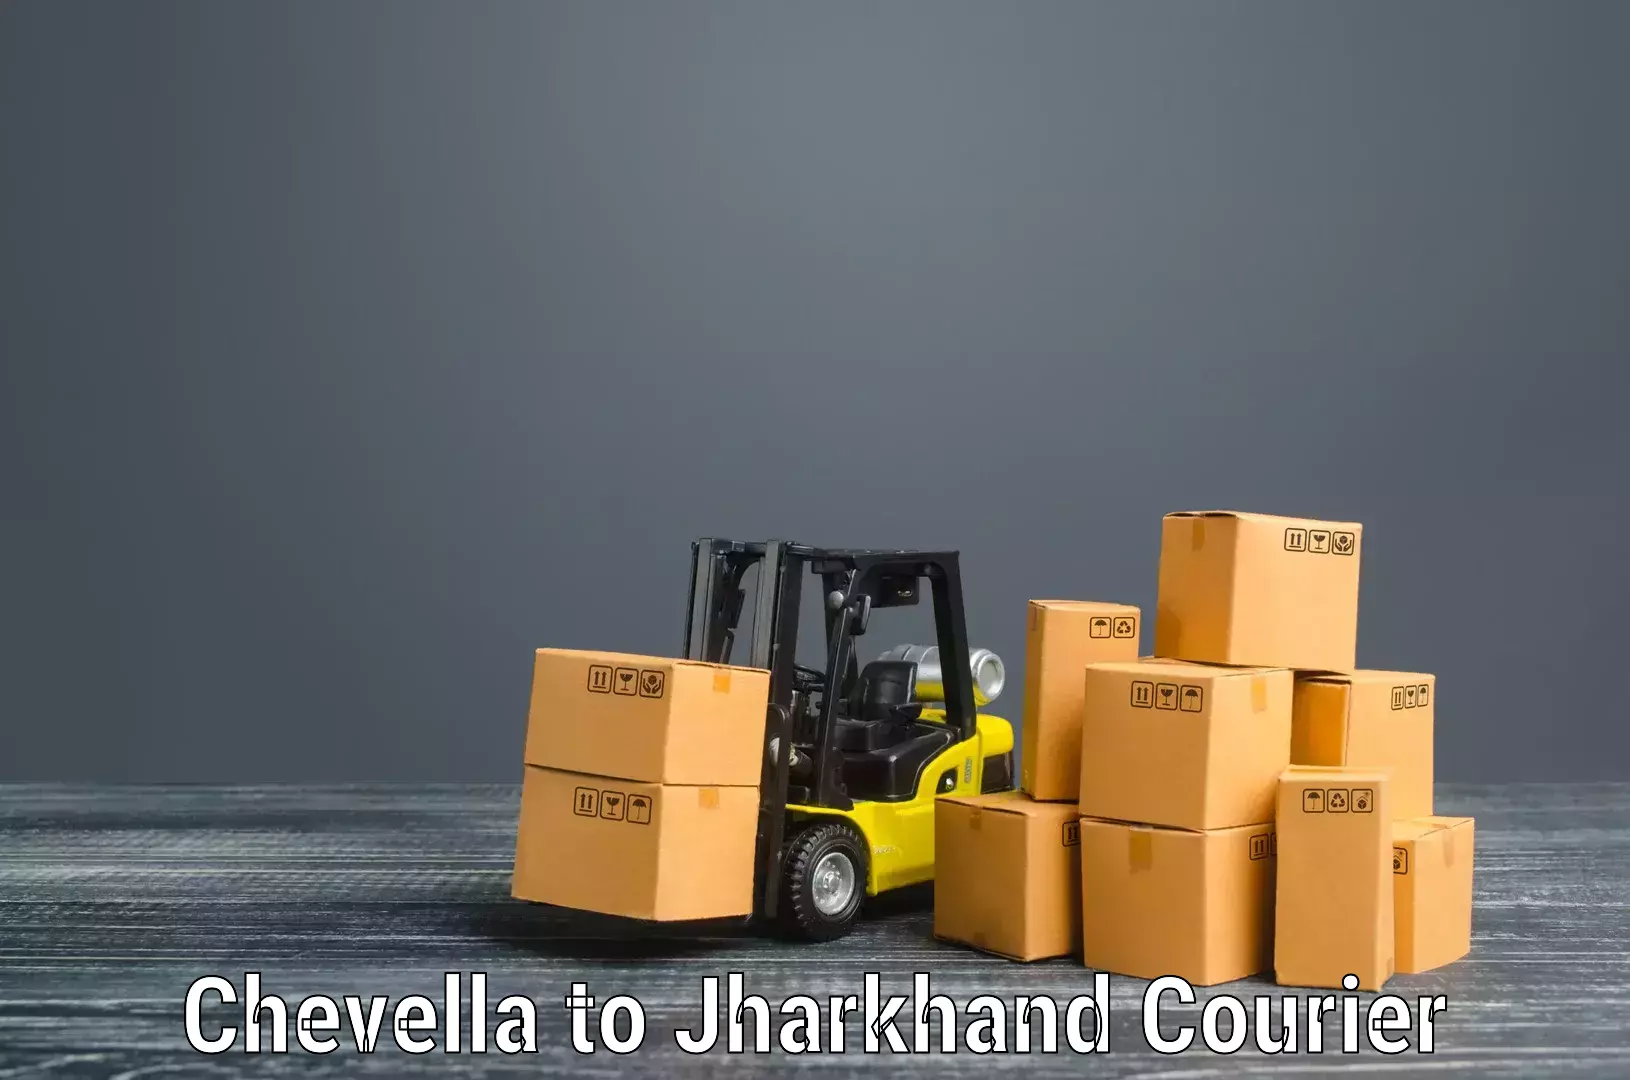 Professional movers in Chevella to Chouparan